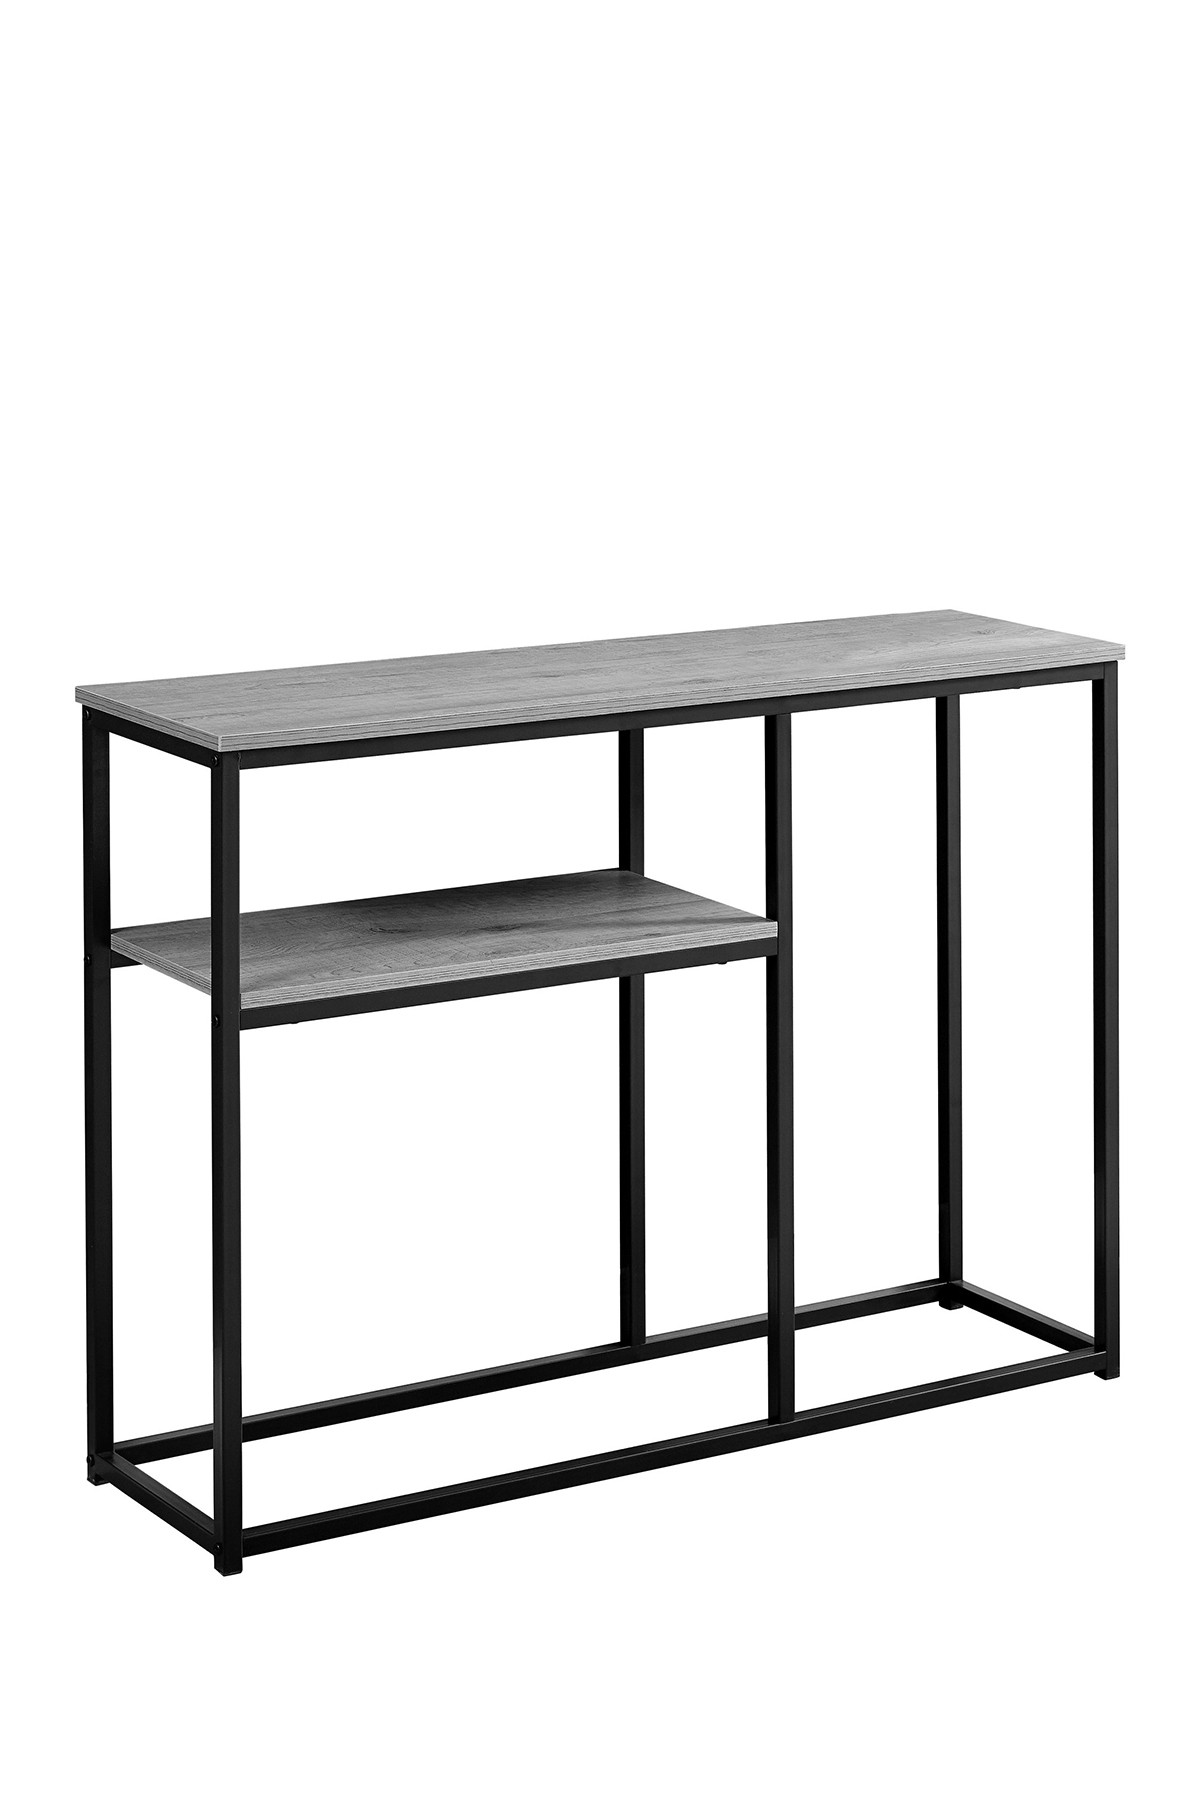 monarch specialties grey hall console accent table nordstrom rack outdoor furniture couch plastic cloth small chest gear lamp oversized end ashley high top dining made coffee